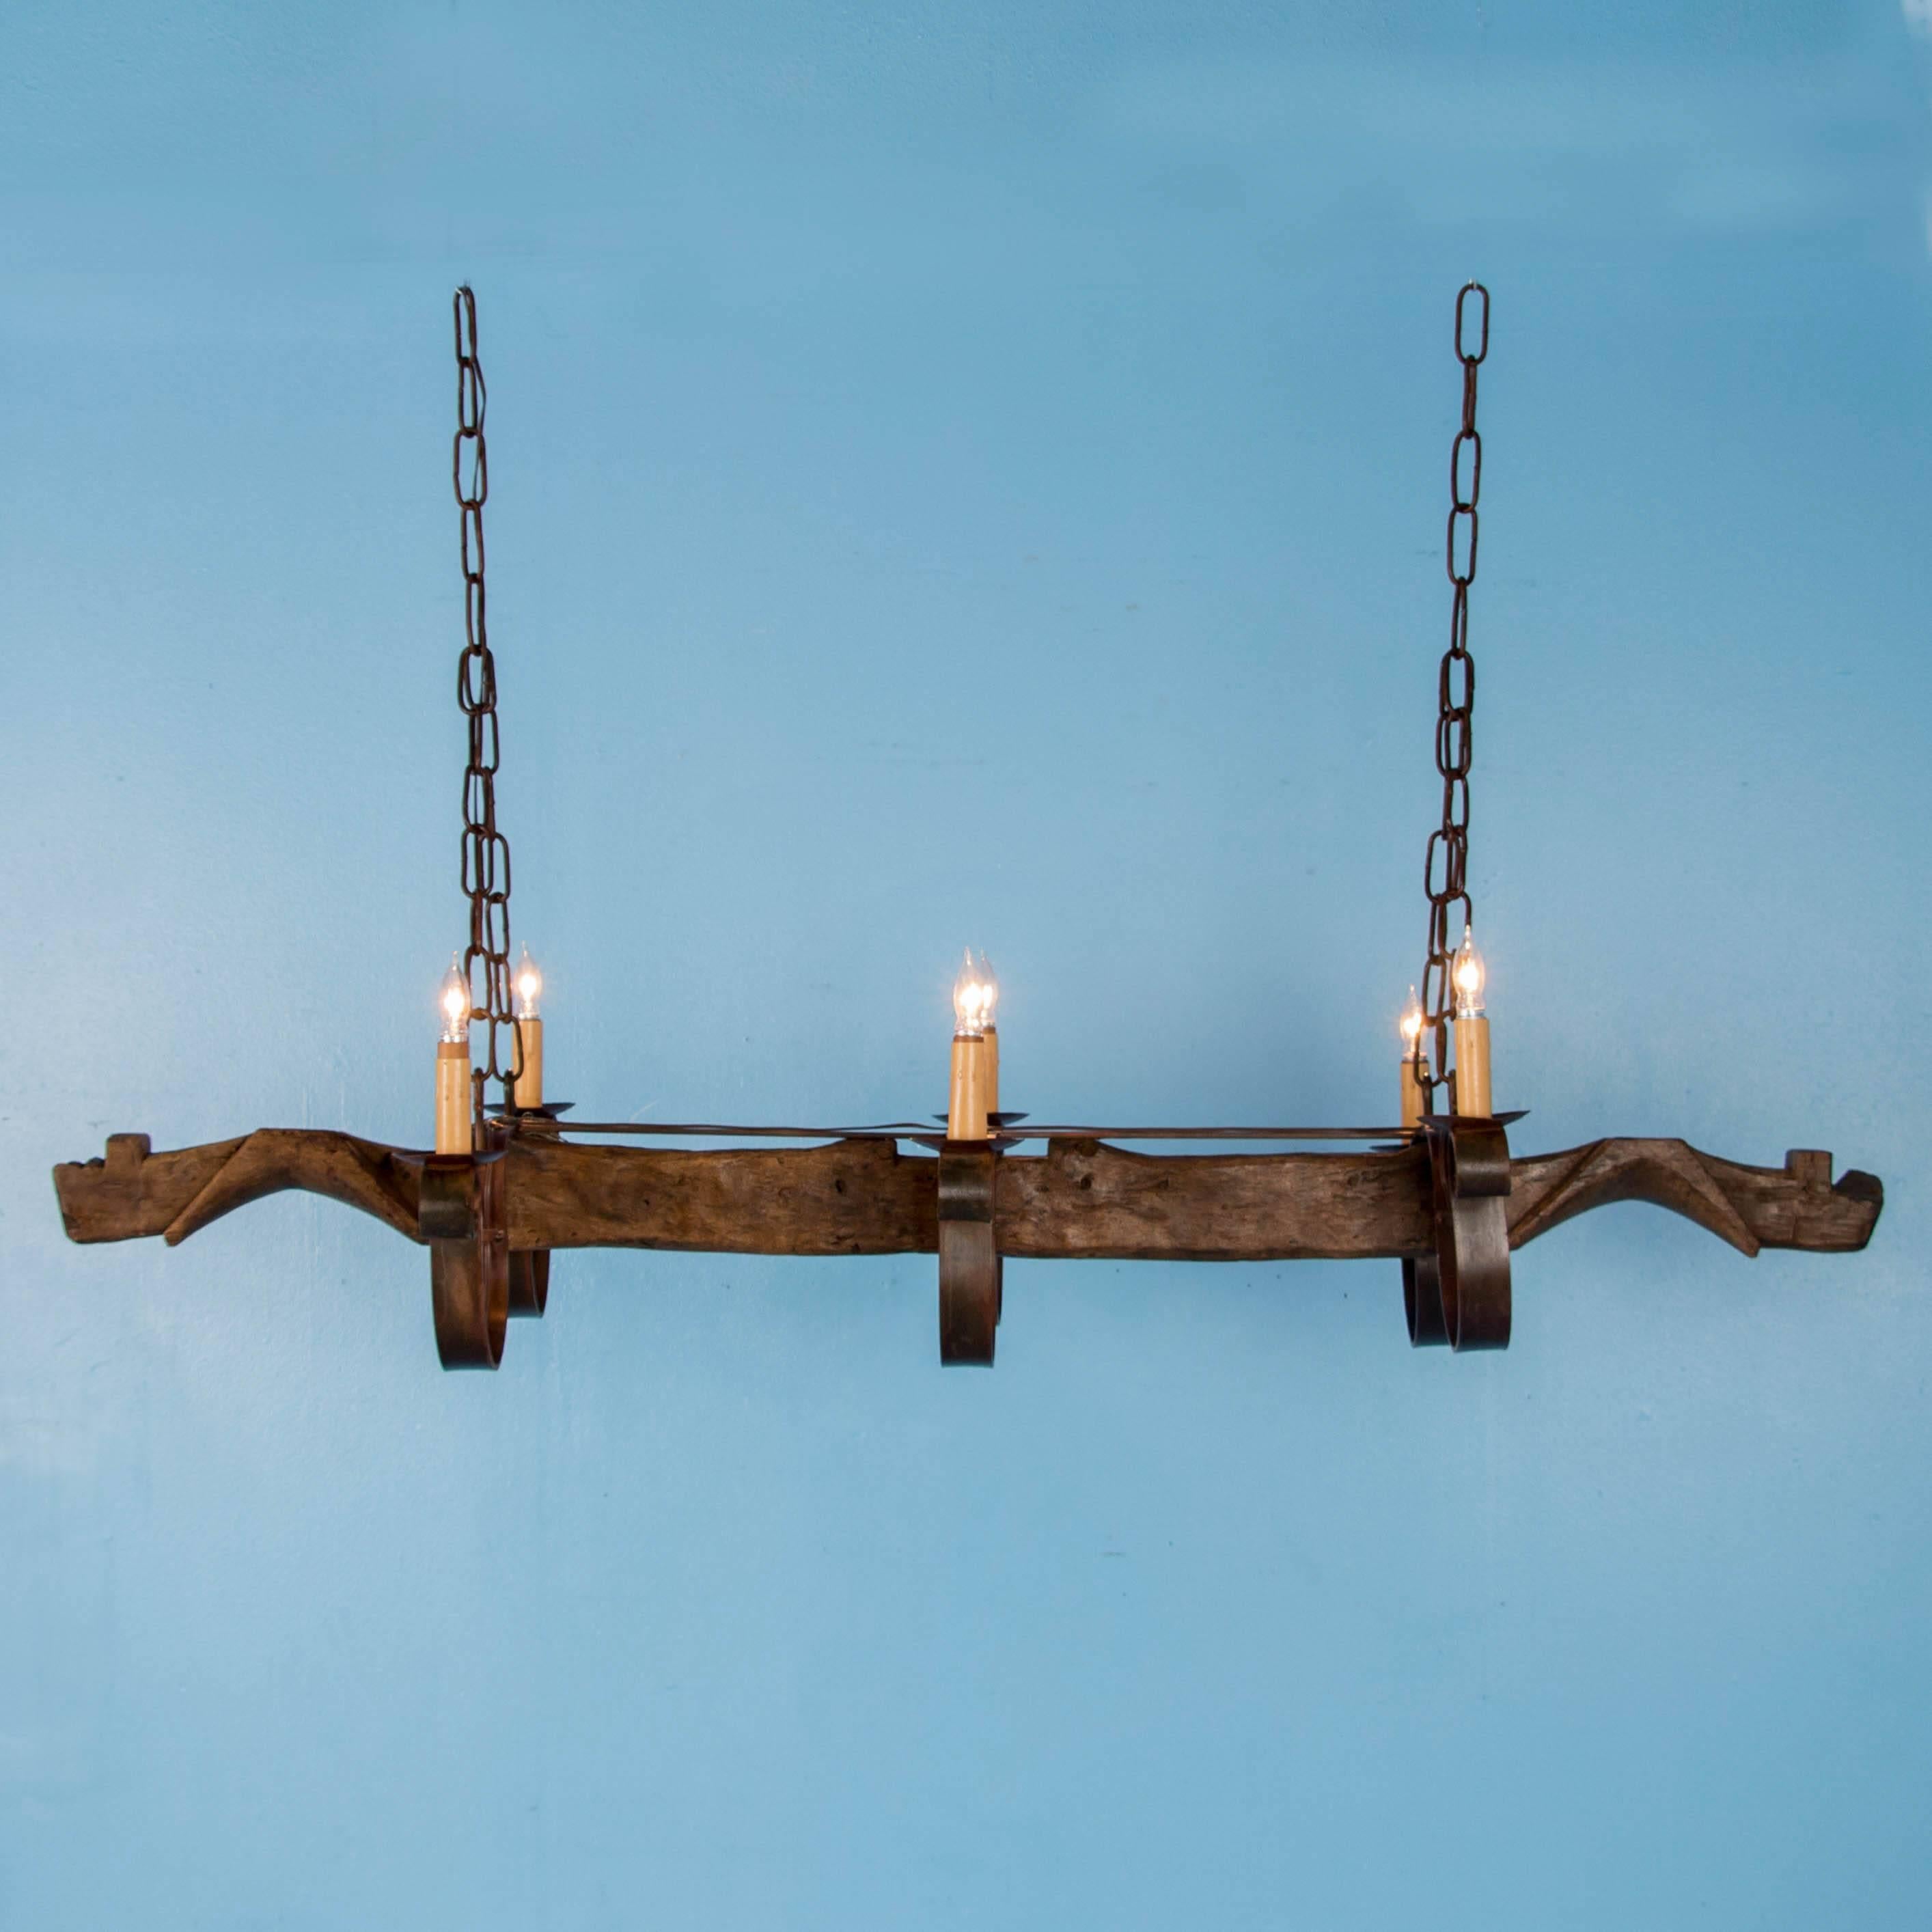 The vintage Mexican ox yoke made of oak, is the foundation for this long six-light chandelier. The rusted patina of the rolled iron arms and chain contribute to the rustic charm of this fixture. The chandelier has been sealed with a wax finish and